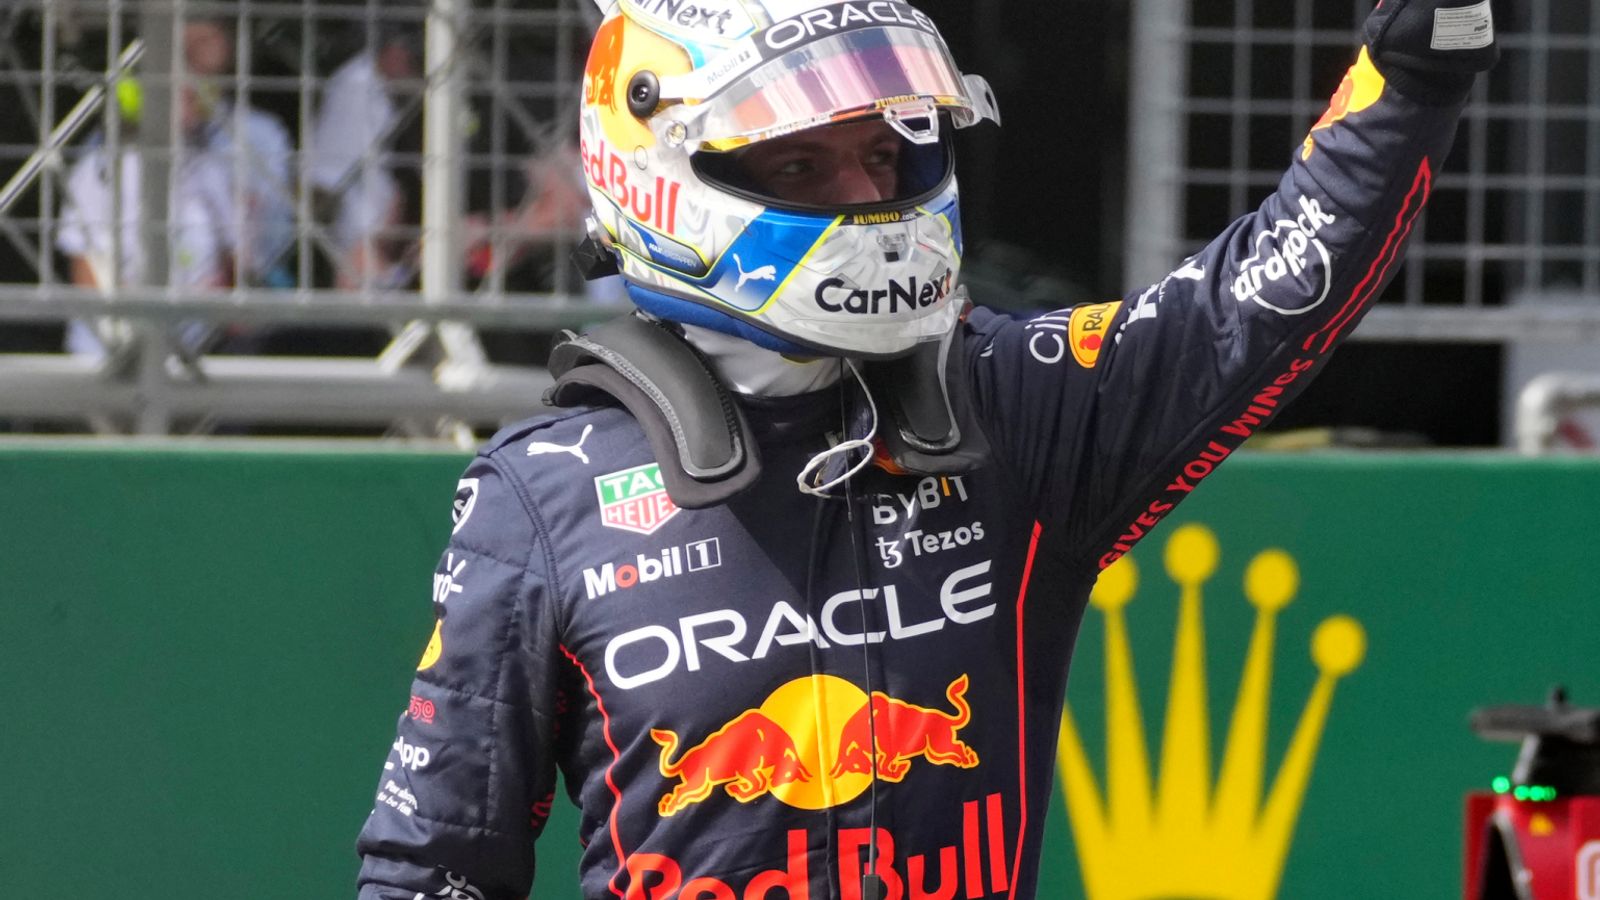 Austrian GP Sprint: Max Verstappen rampant to win ahead of Charles Leclerc, Lewis Hamilton’s comeback stalls after shunt